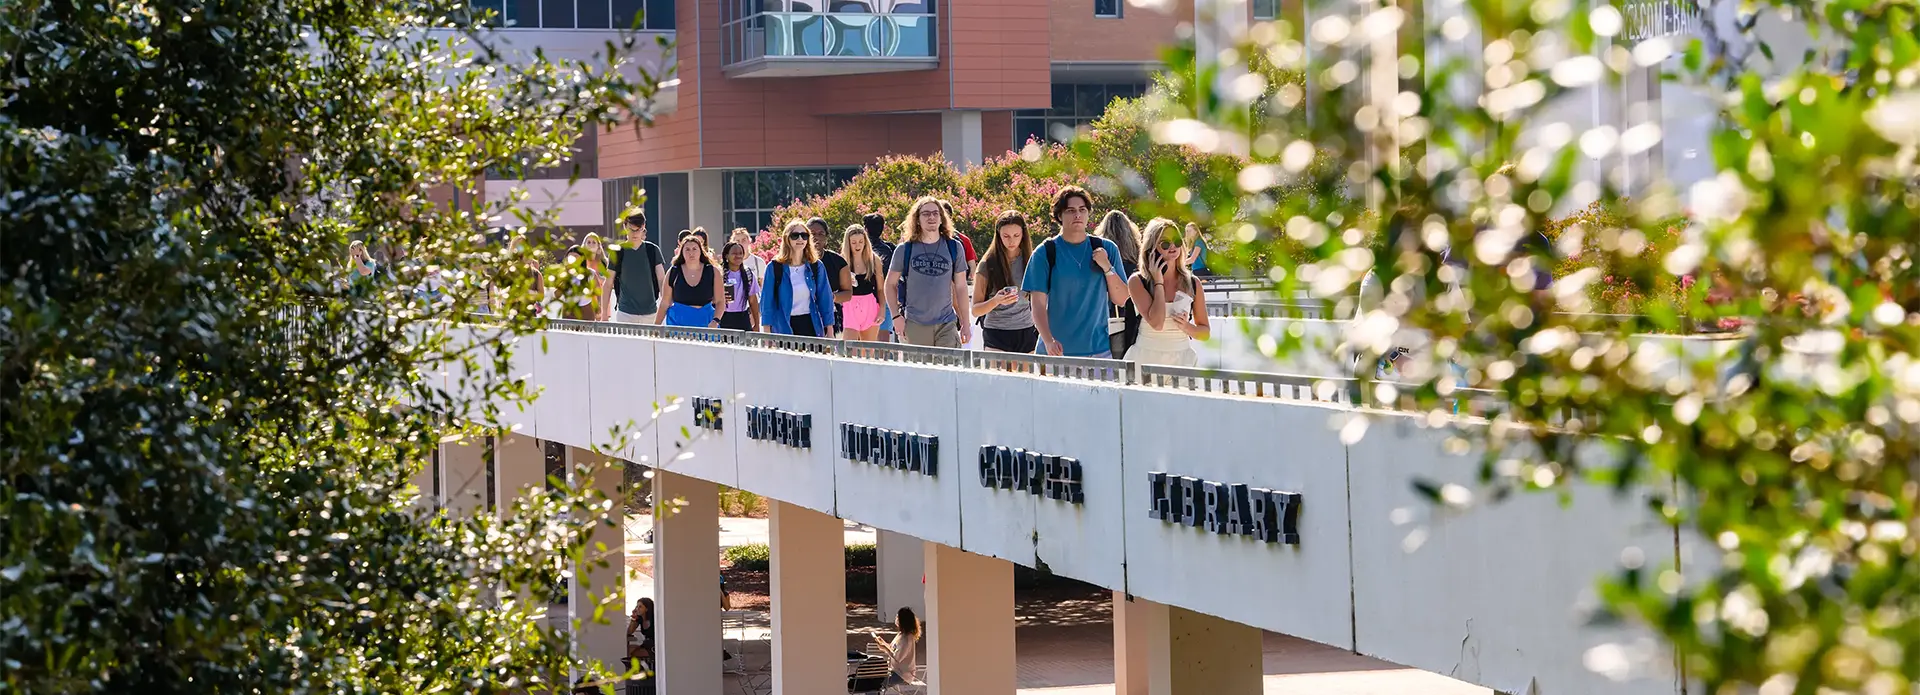 A group of students walk across the Library Bridge with two green leafy trees on each side.